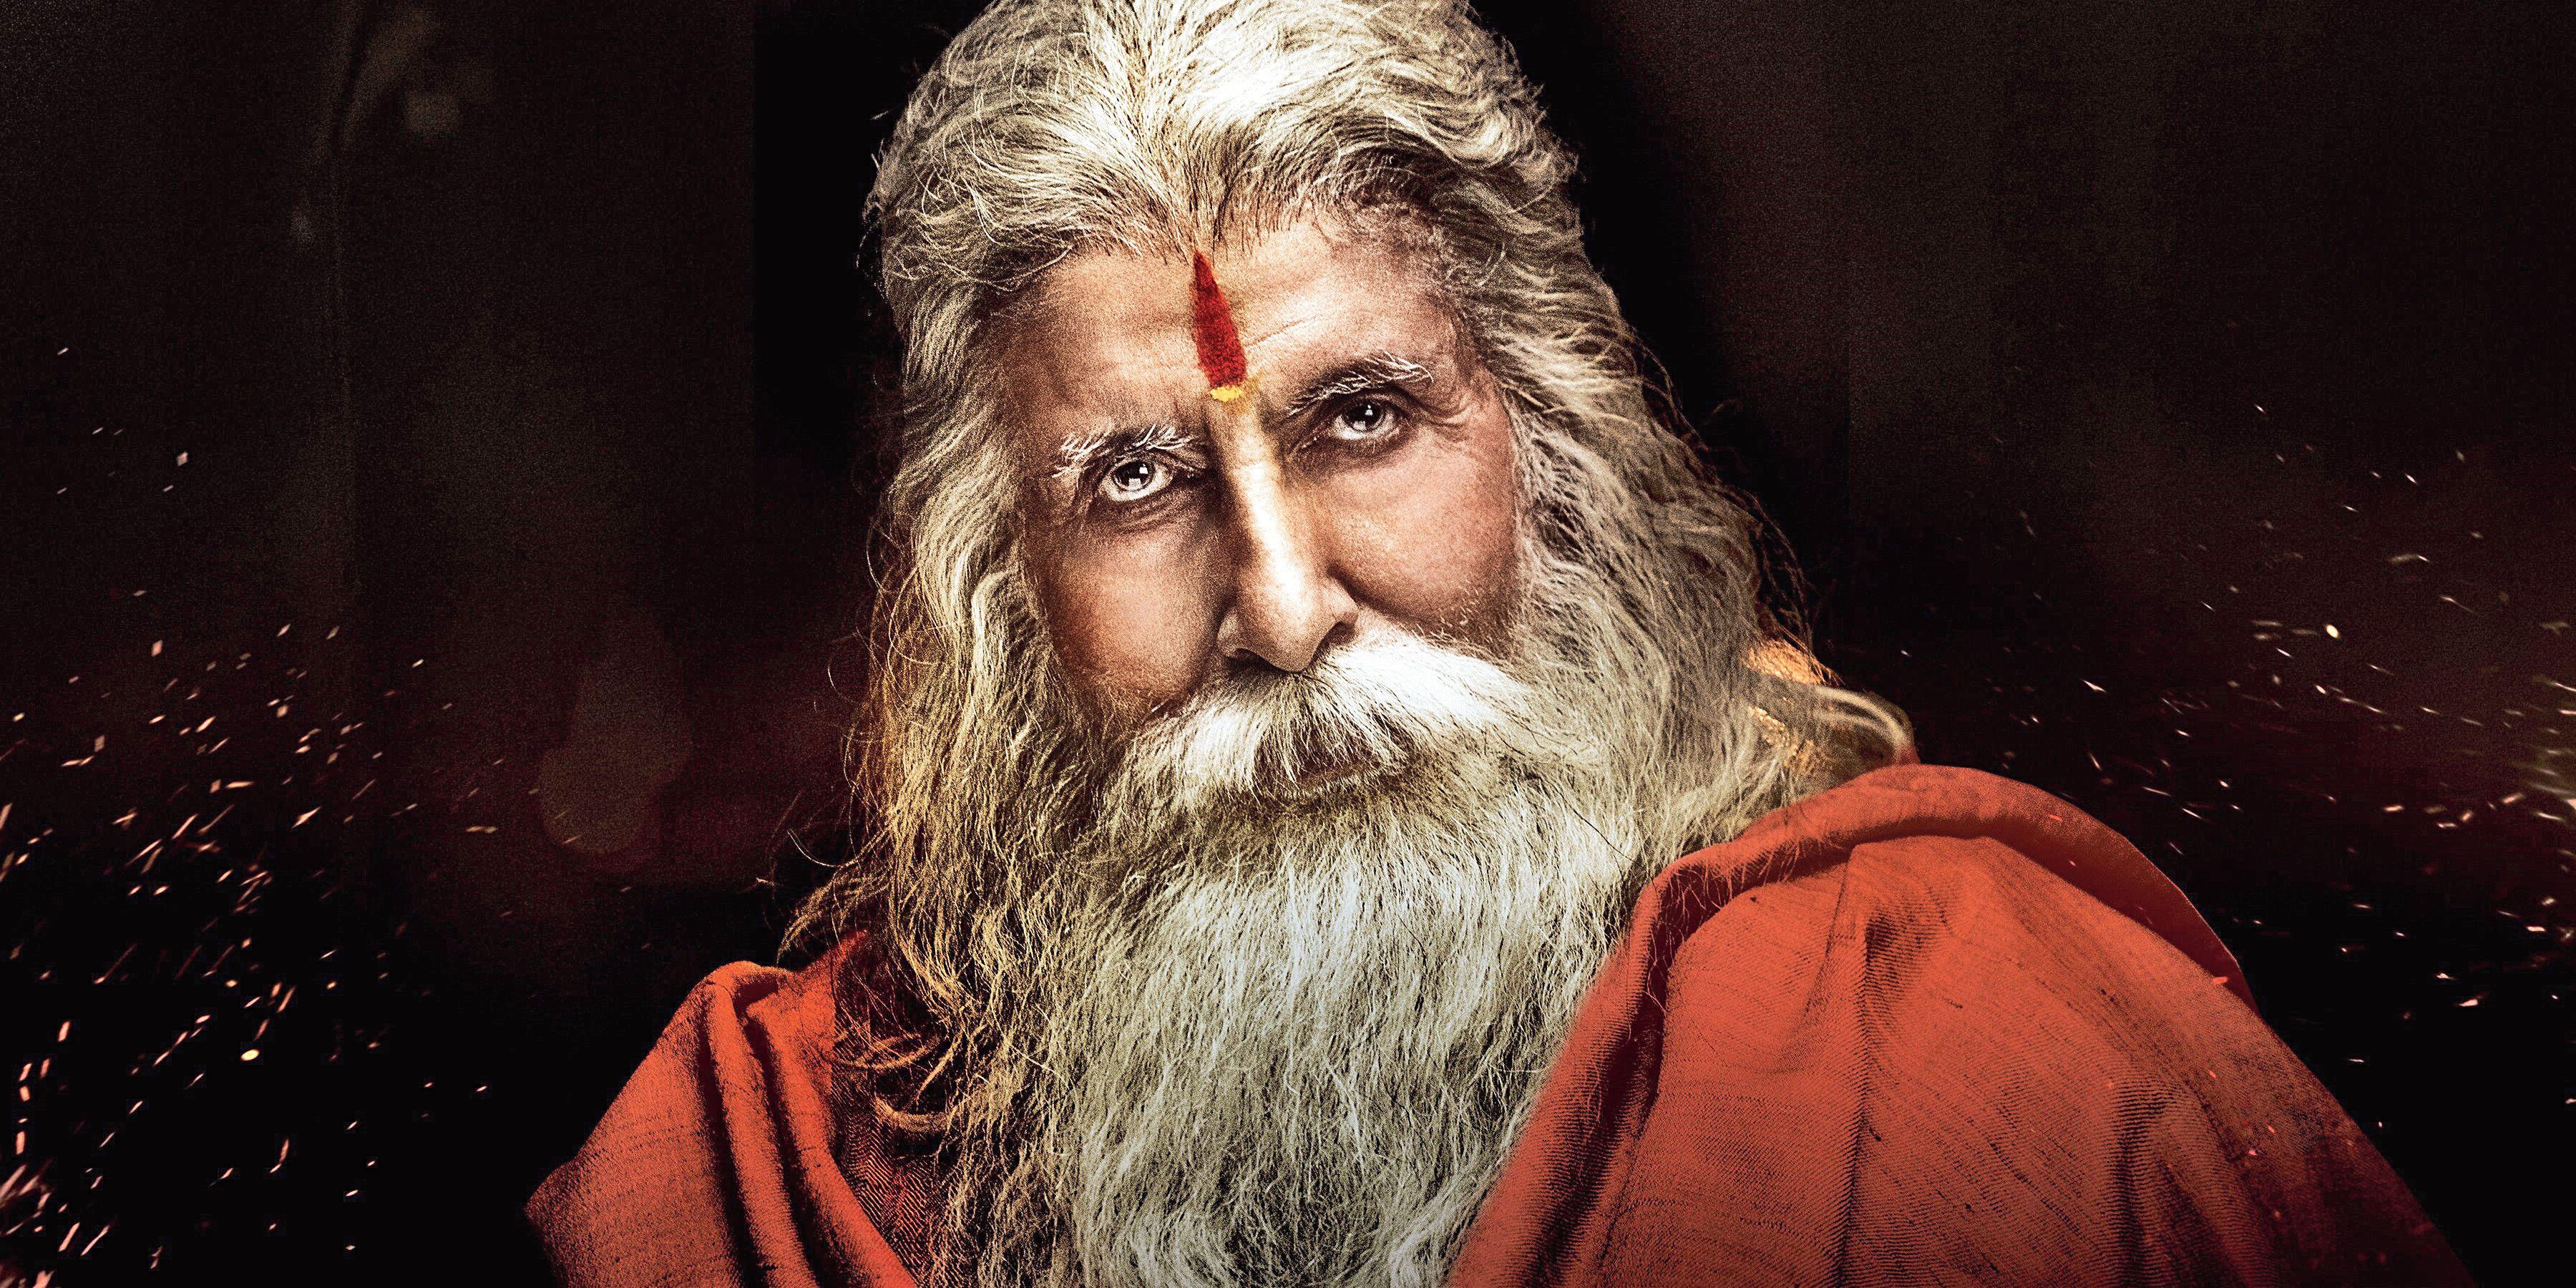 On his birthday, Amitabh Bachchan shared the first look of his Telugu period film Sye Raa Narasimha Reddy, which releases in 2019 